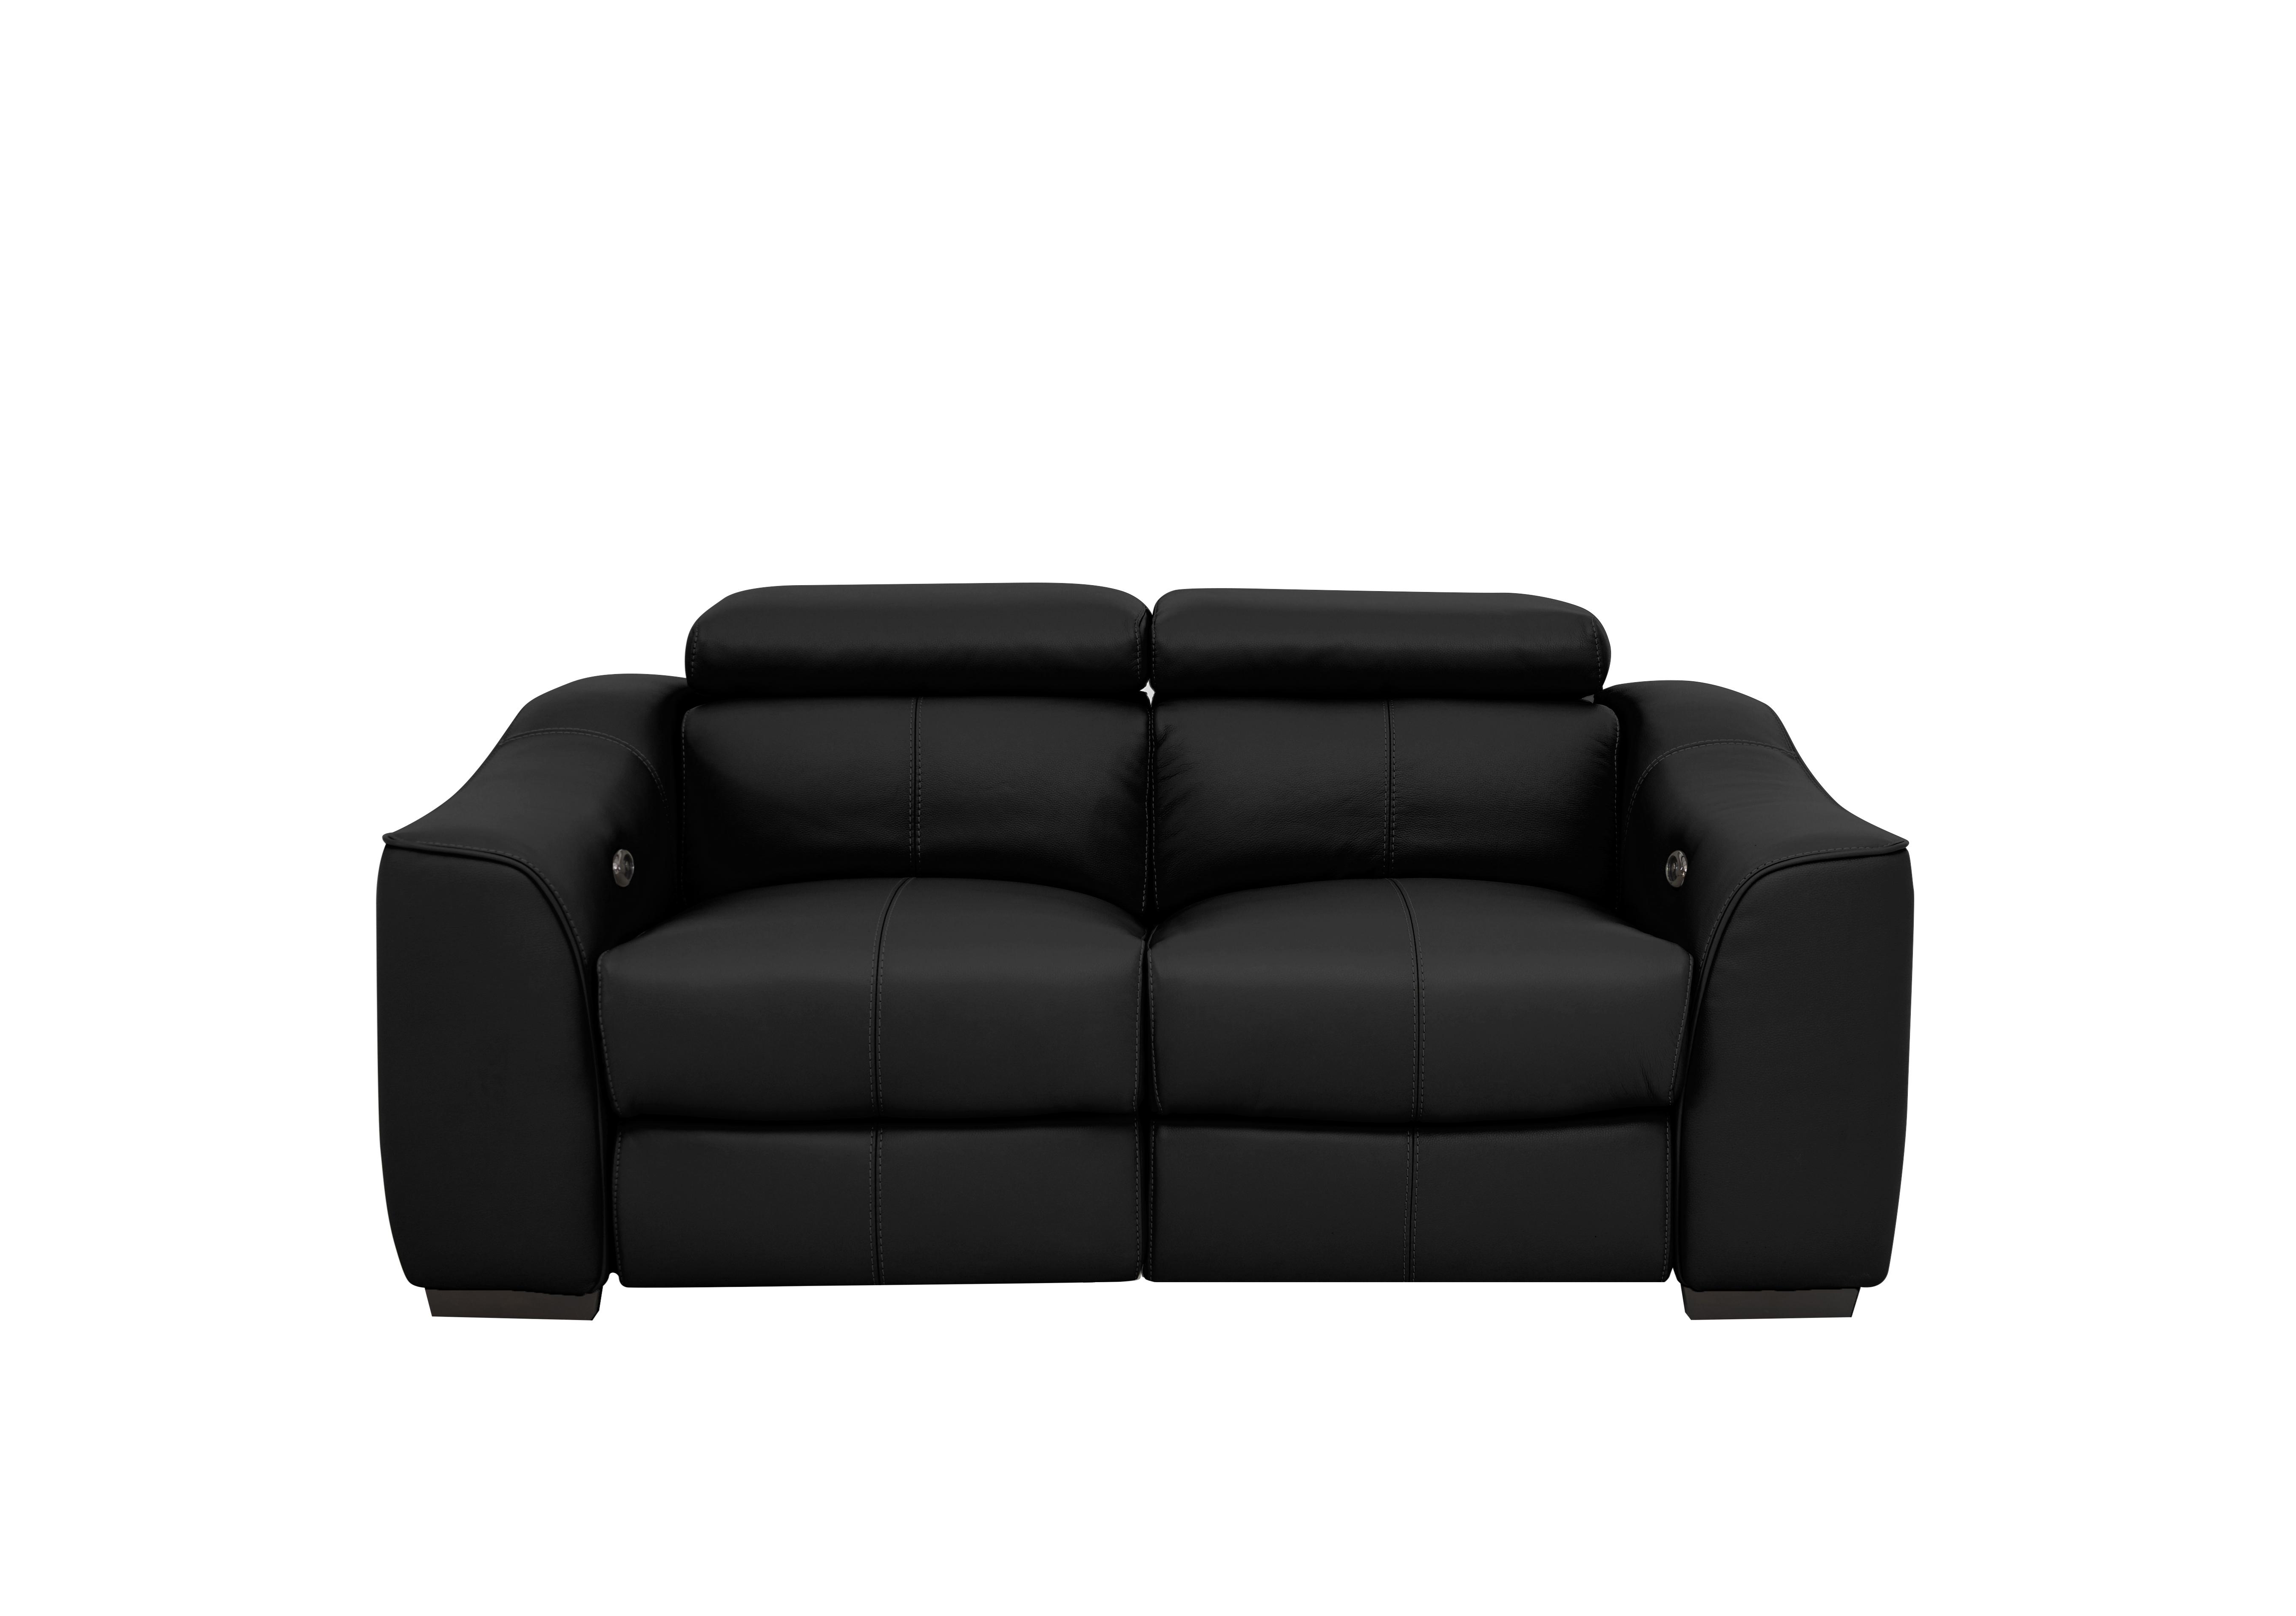 Elixir 2 Seater Leather Sofa in Bv-3500 Classic Black on Furniture Village